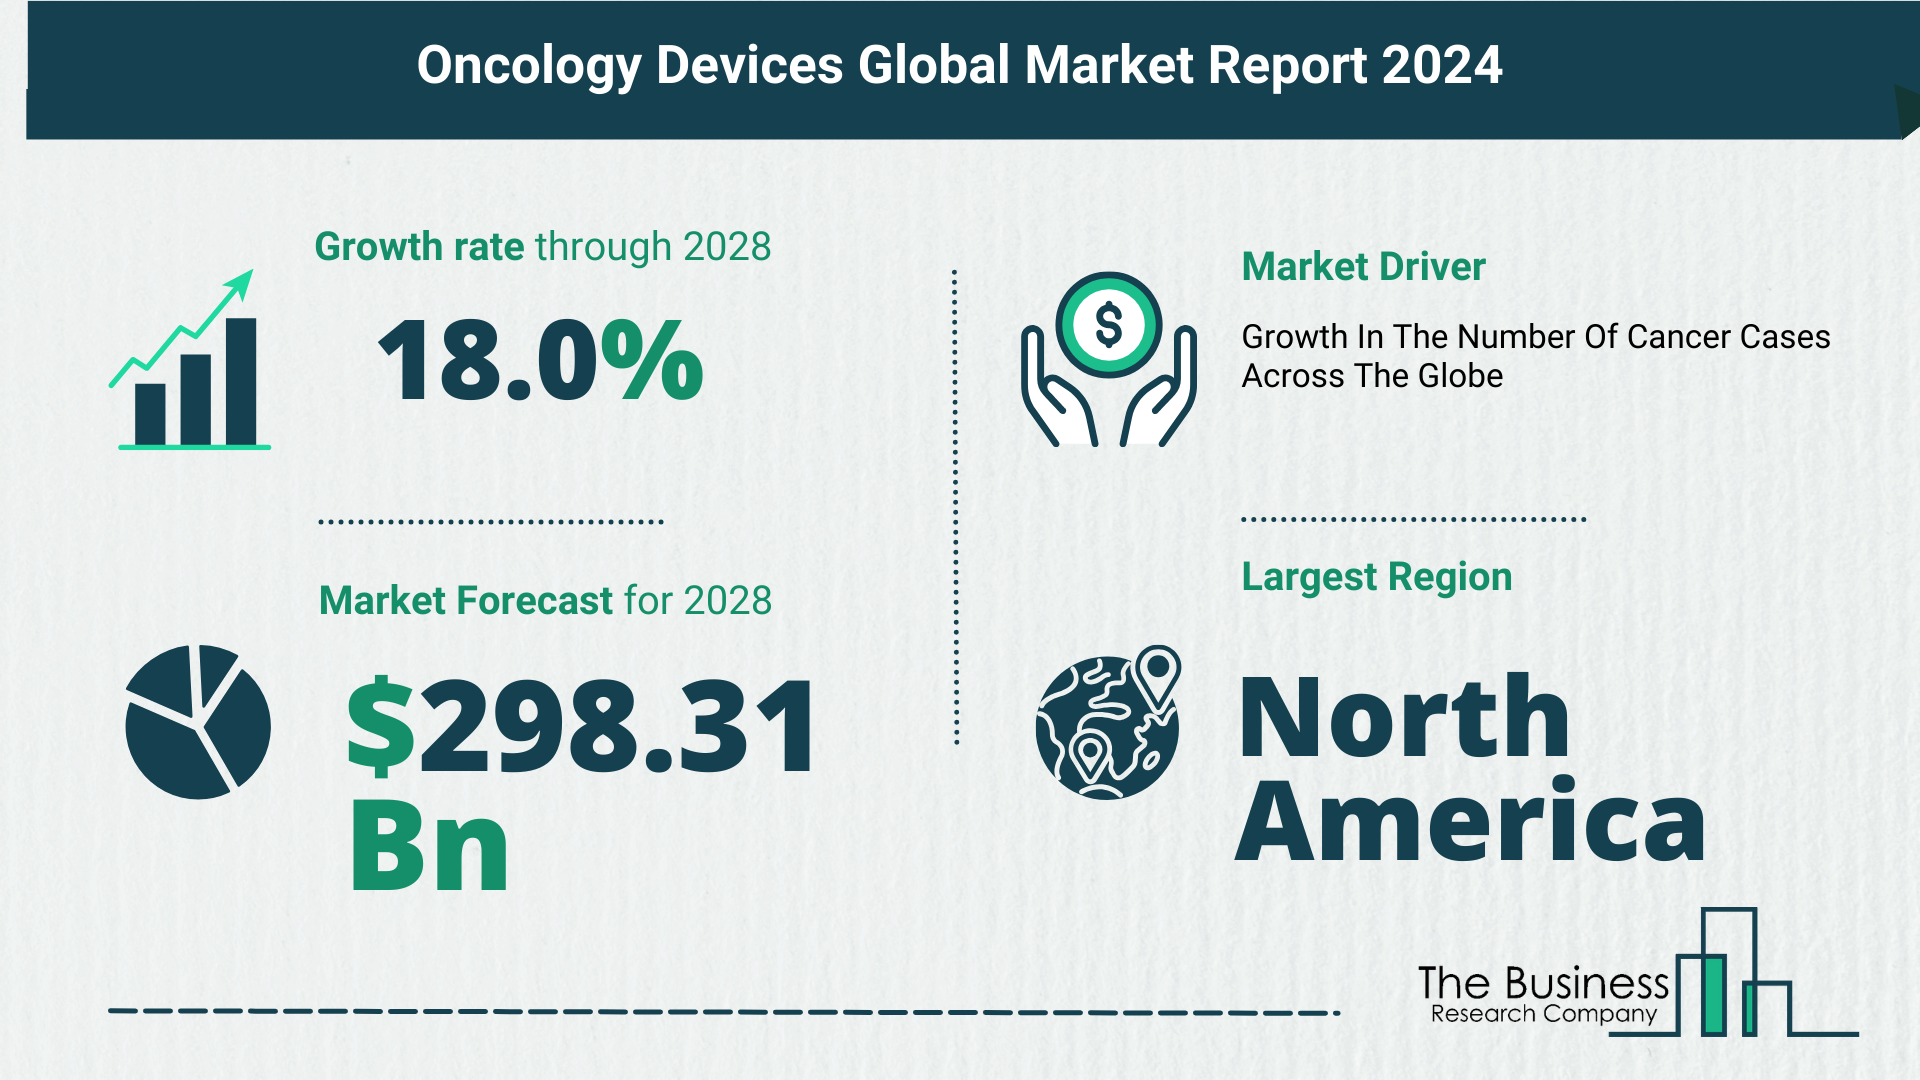 Global Oncology Devices Market Analysis 2024: Size, Share, And Key Trends